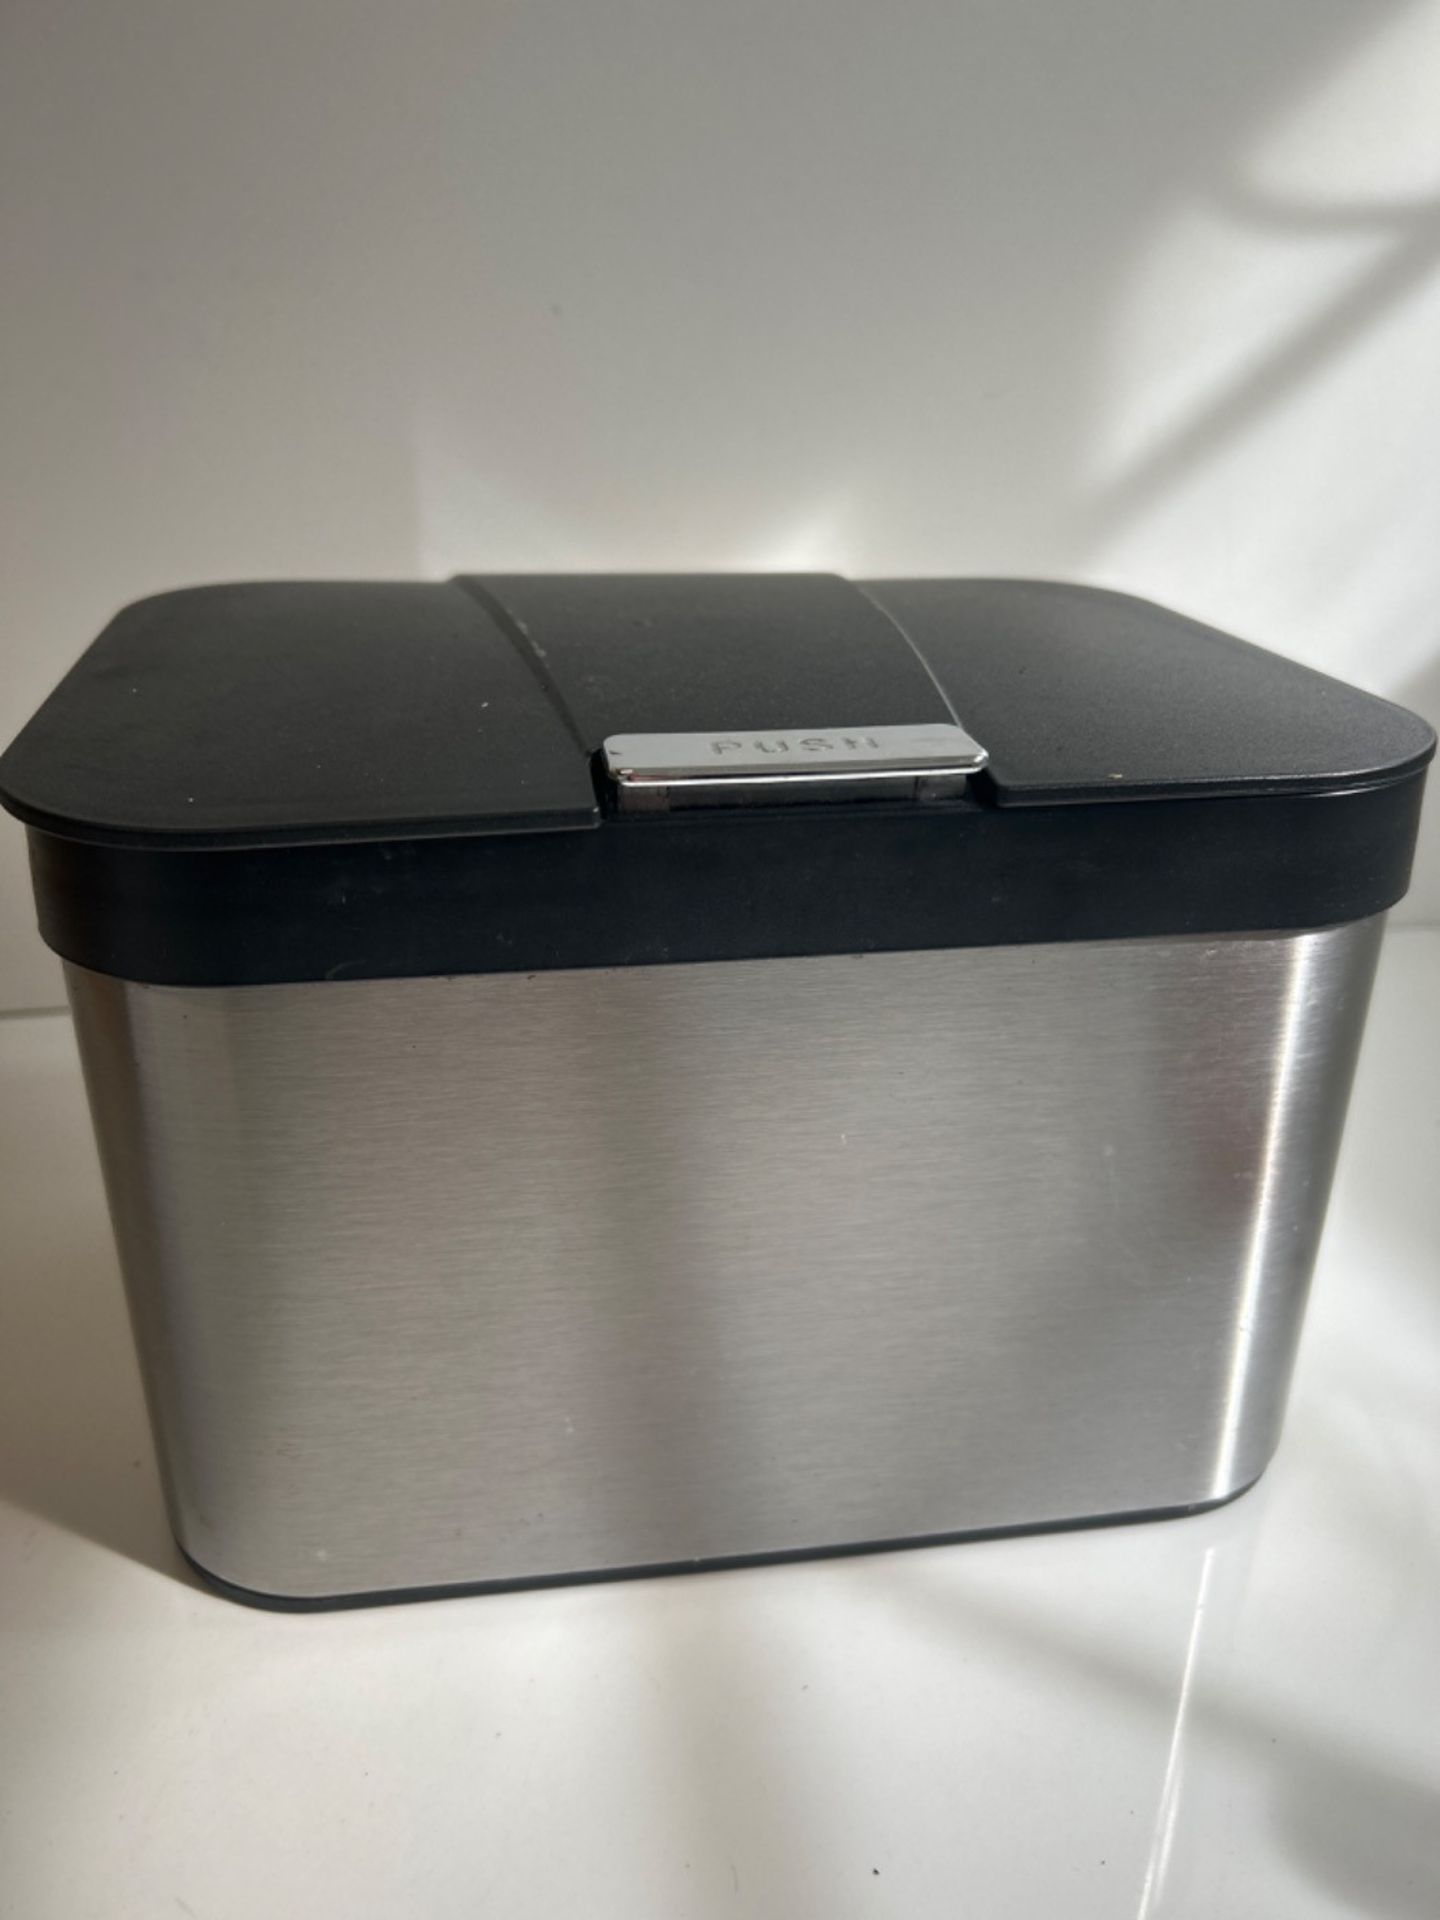 Ibergrif - Kitchen Food Waste Caddy, Countertop Bin, Bathroom Bins With Lids - 4.3 Litres (25 X 18,. - Image 2 of 3